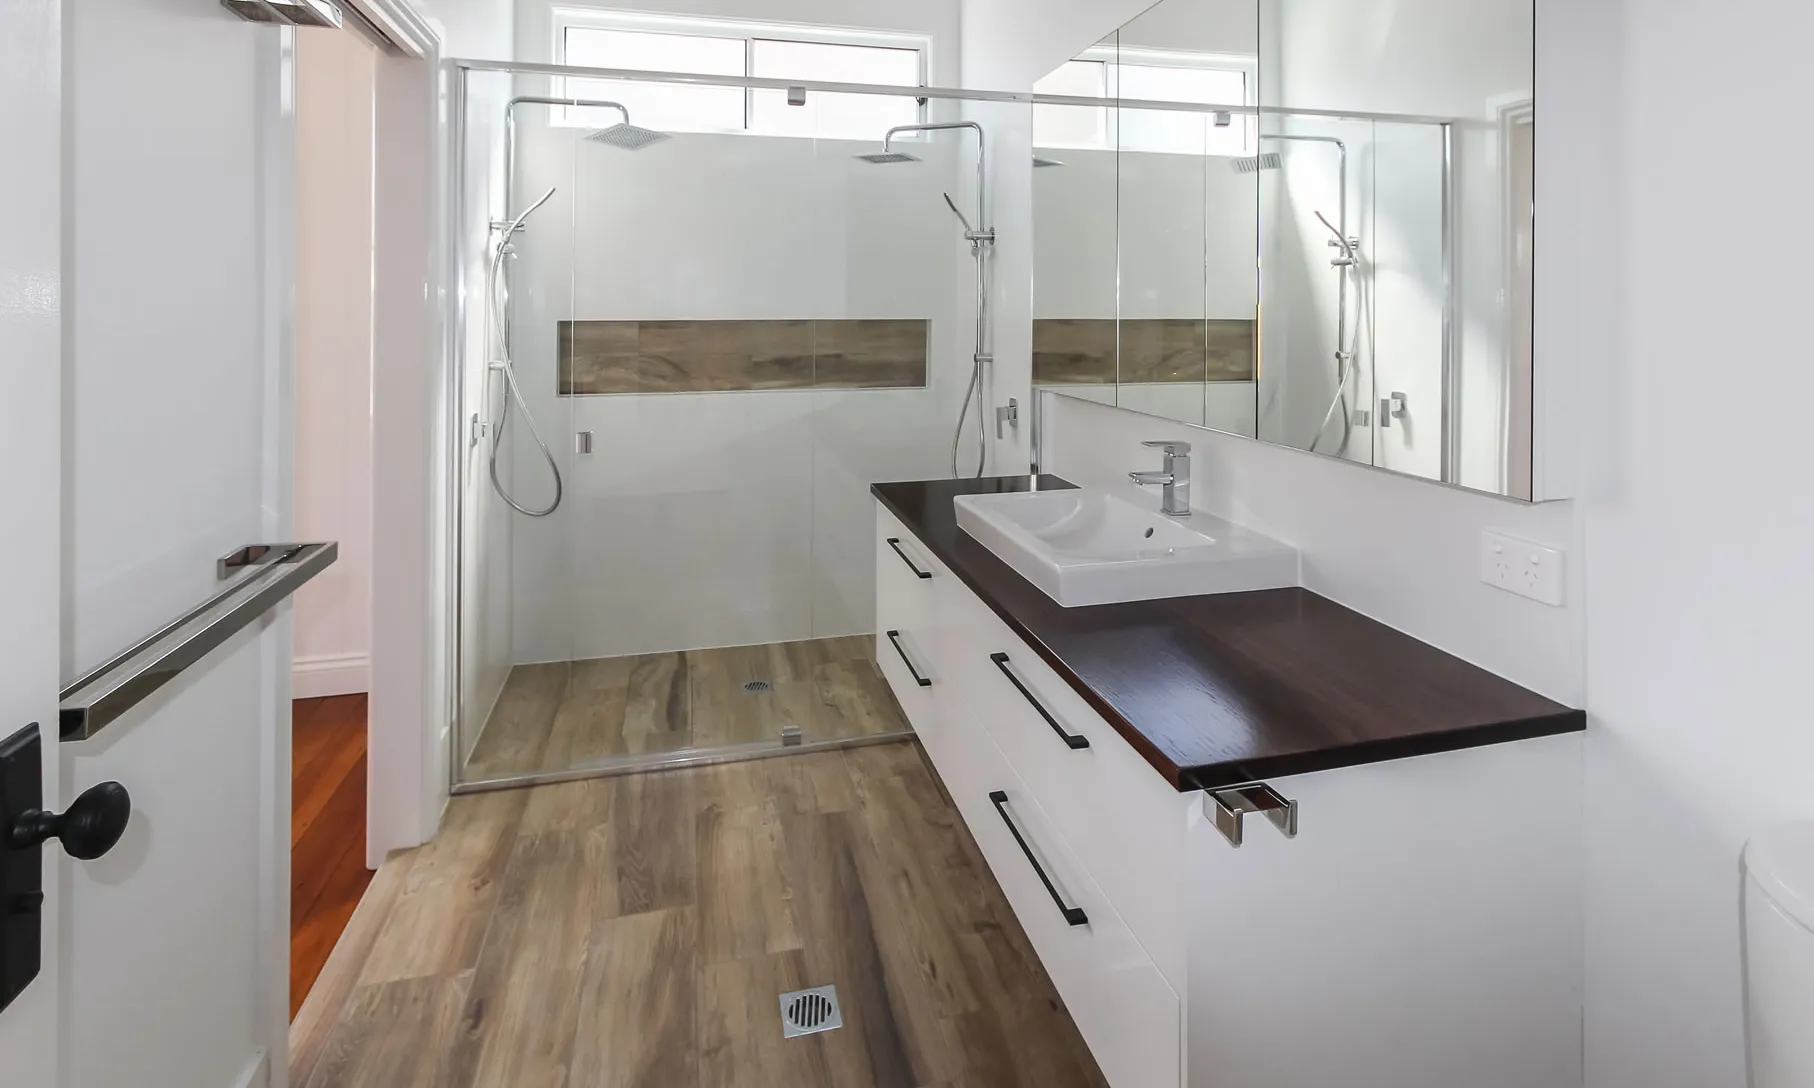 Semi-frameless shower screen and vanity with timber top